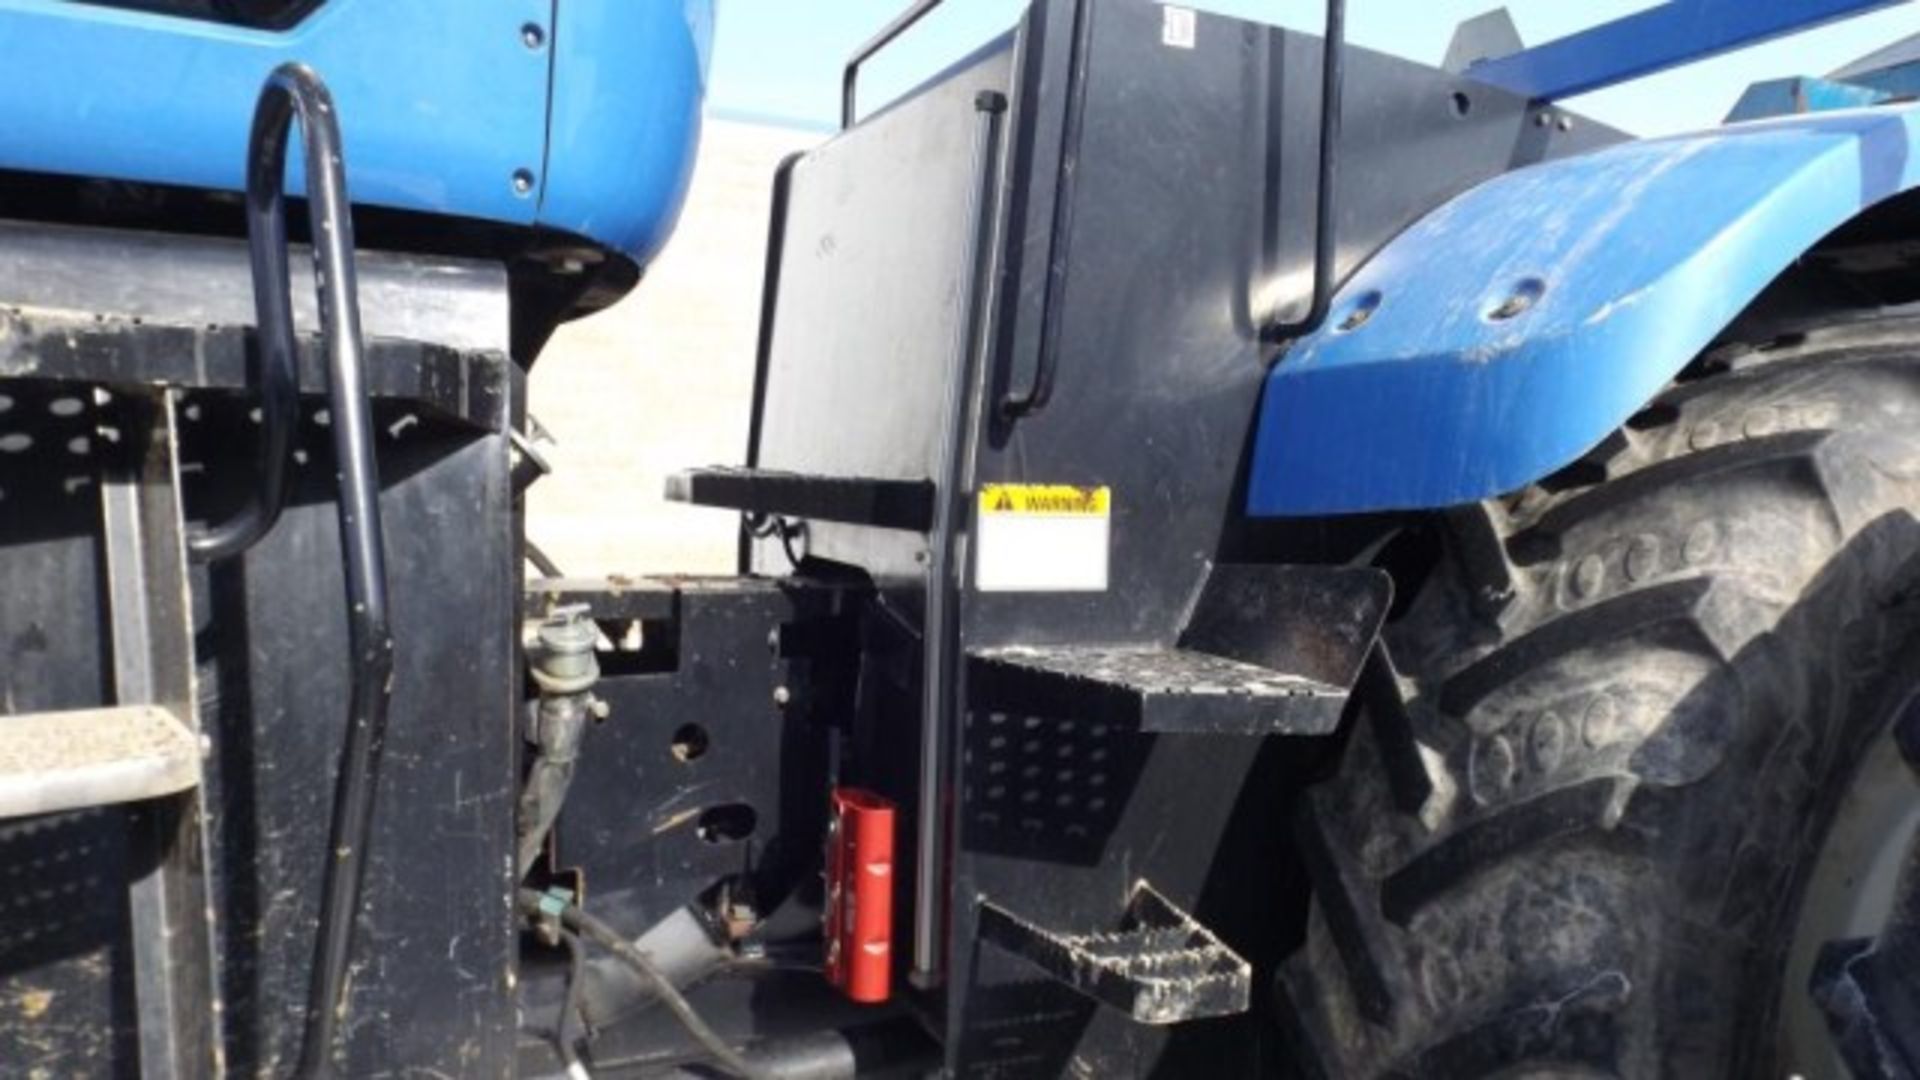 New Holland TJ375 Tractor '03, sn# RVS002016 7683 Hrs, 4WD, Fully Equipped Cab, 375 HP, 16/2 PS, - Image 8 of 24